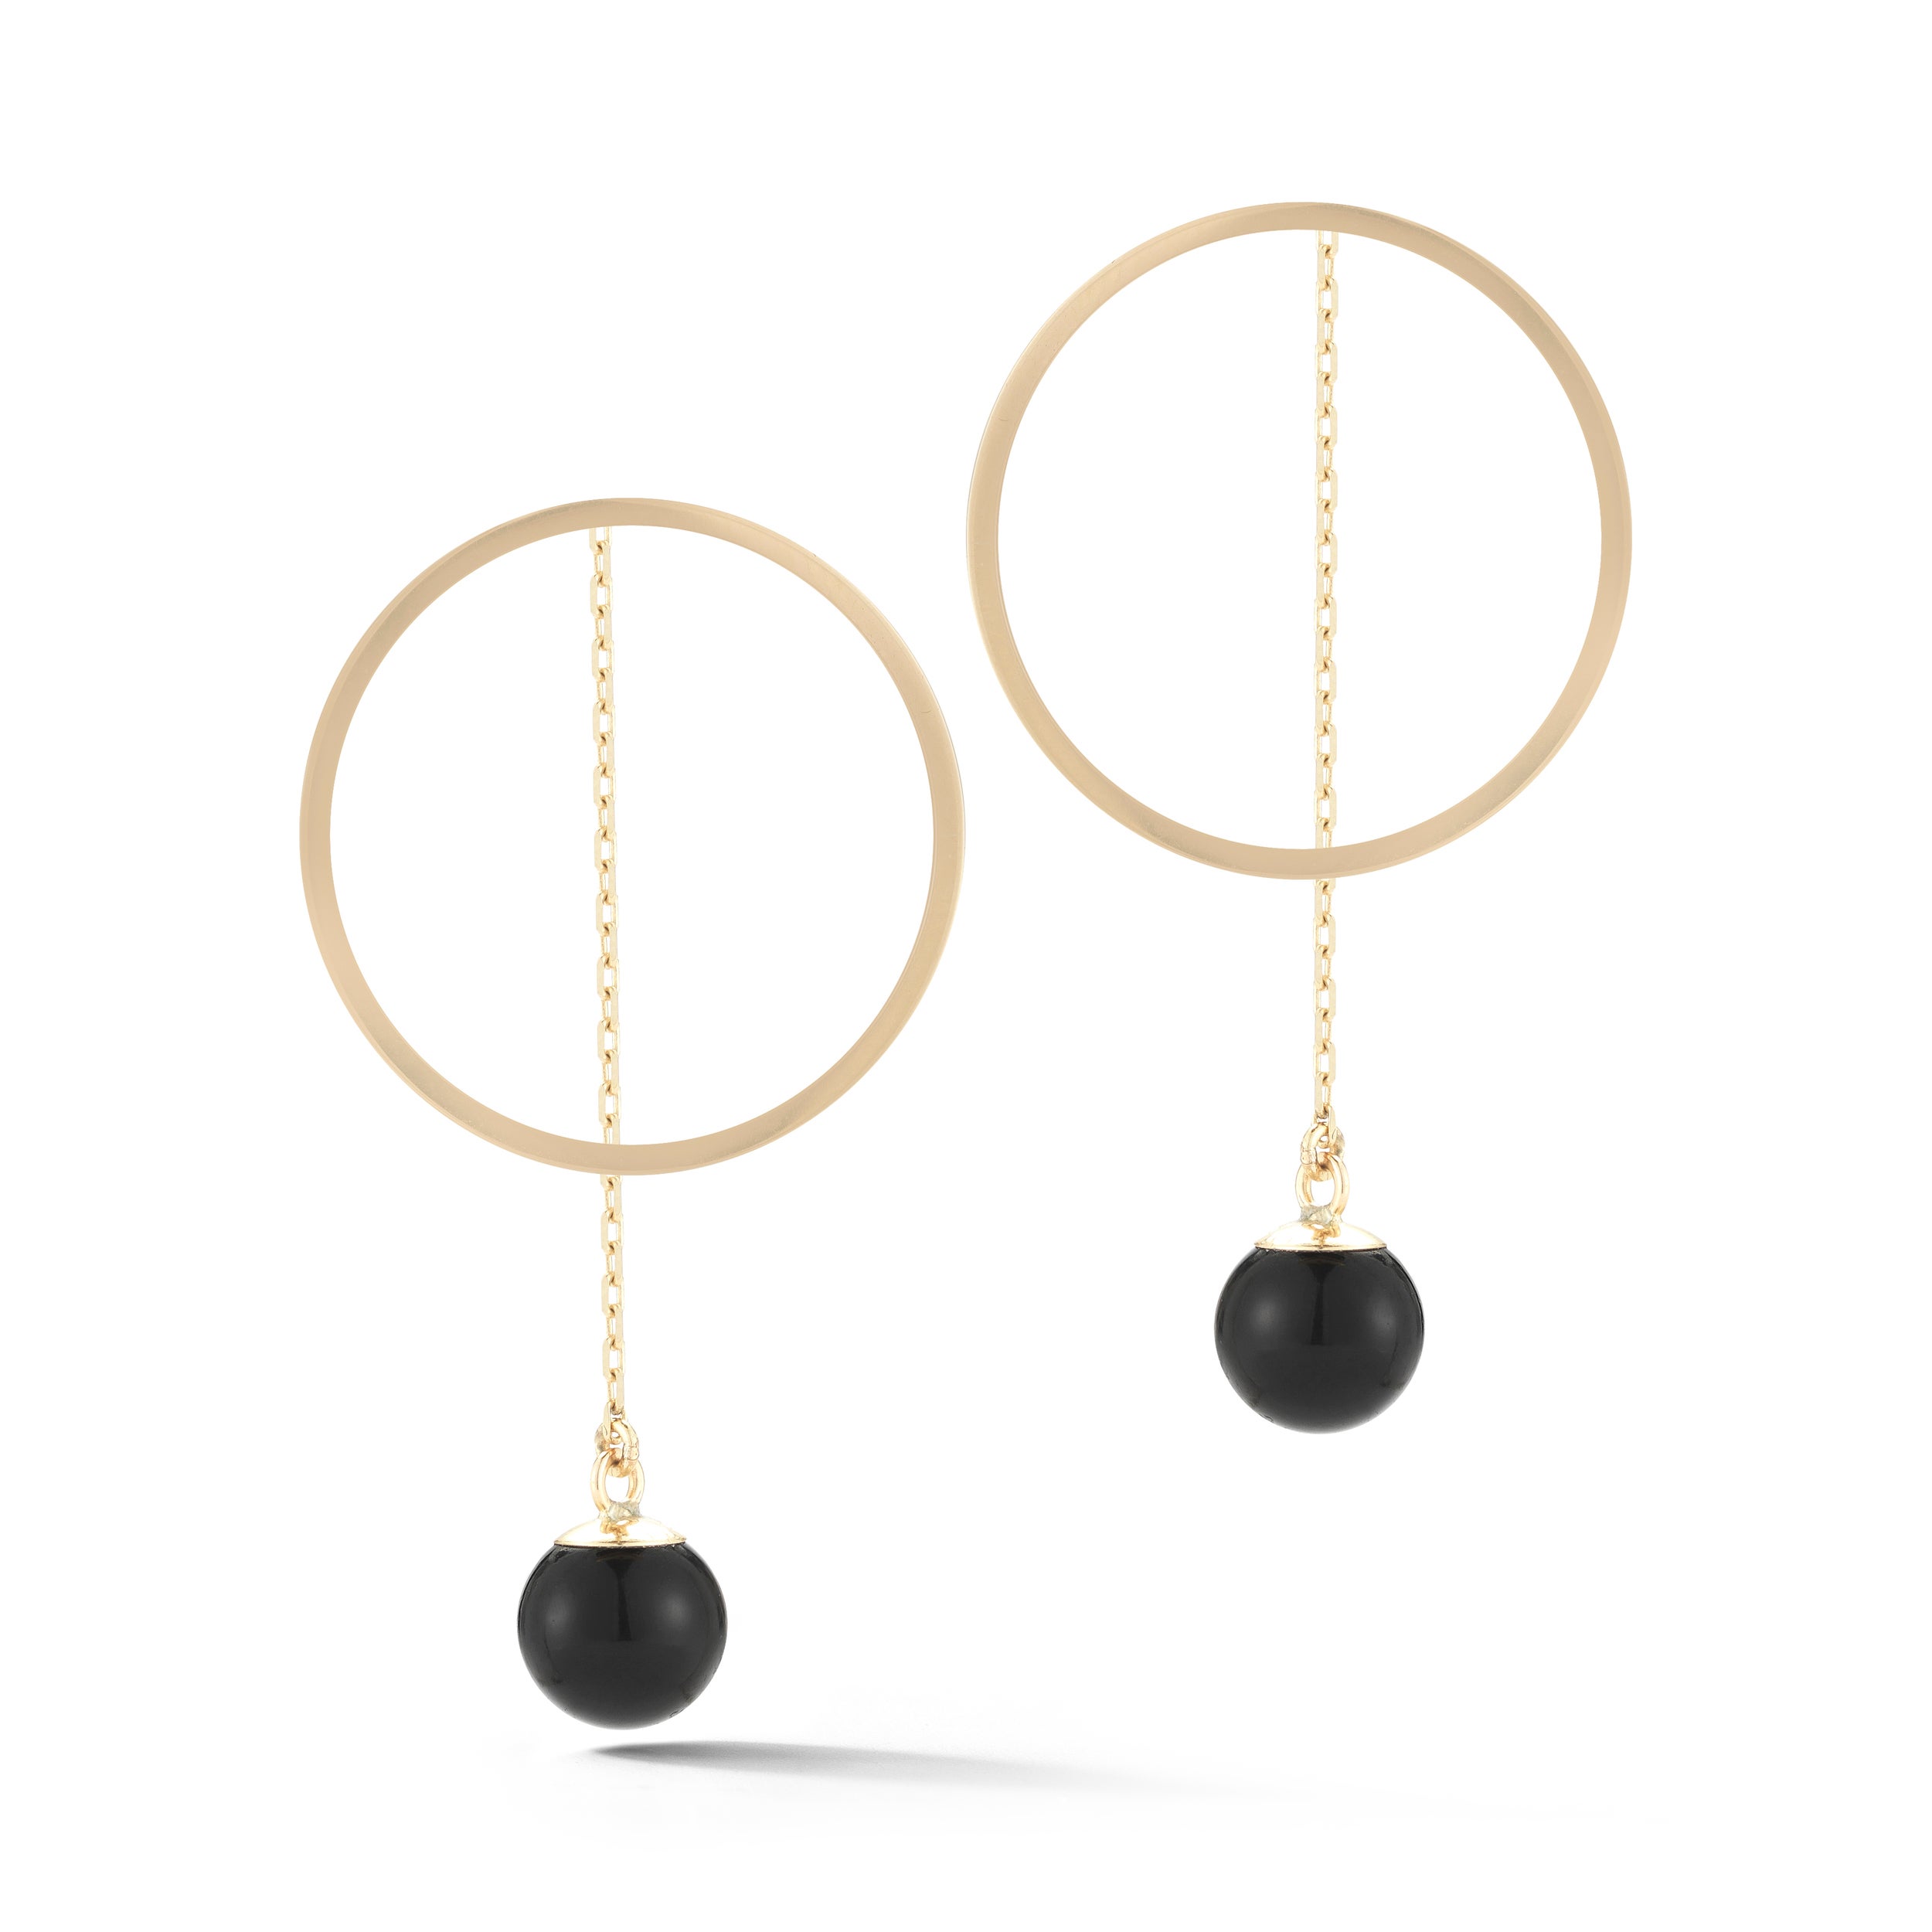 We Love The Minimal and Amazing Jewelry by Mateo